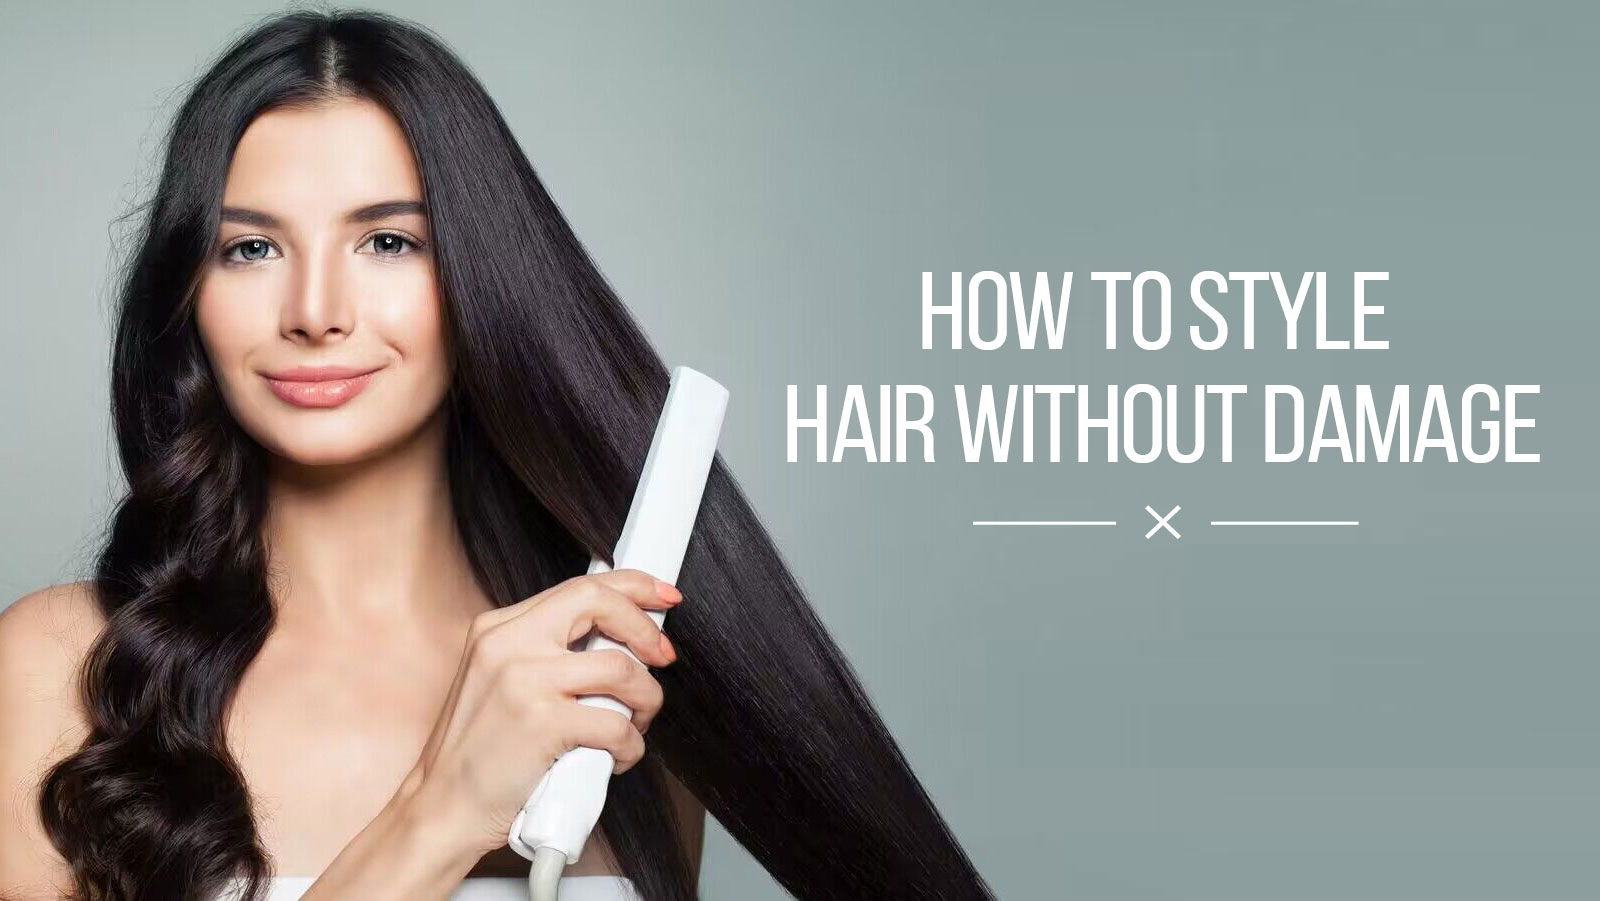 HOW TO STYLE HAIR WITHOUT DAMAGE